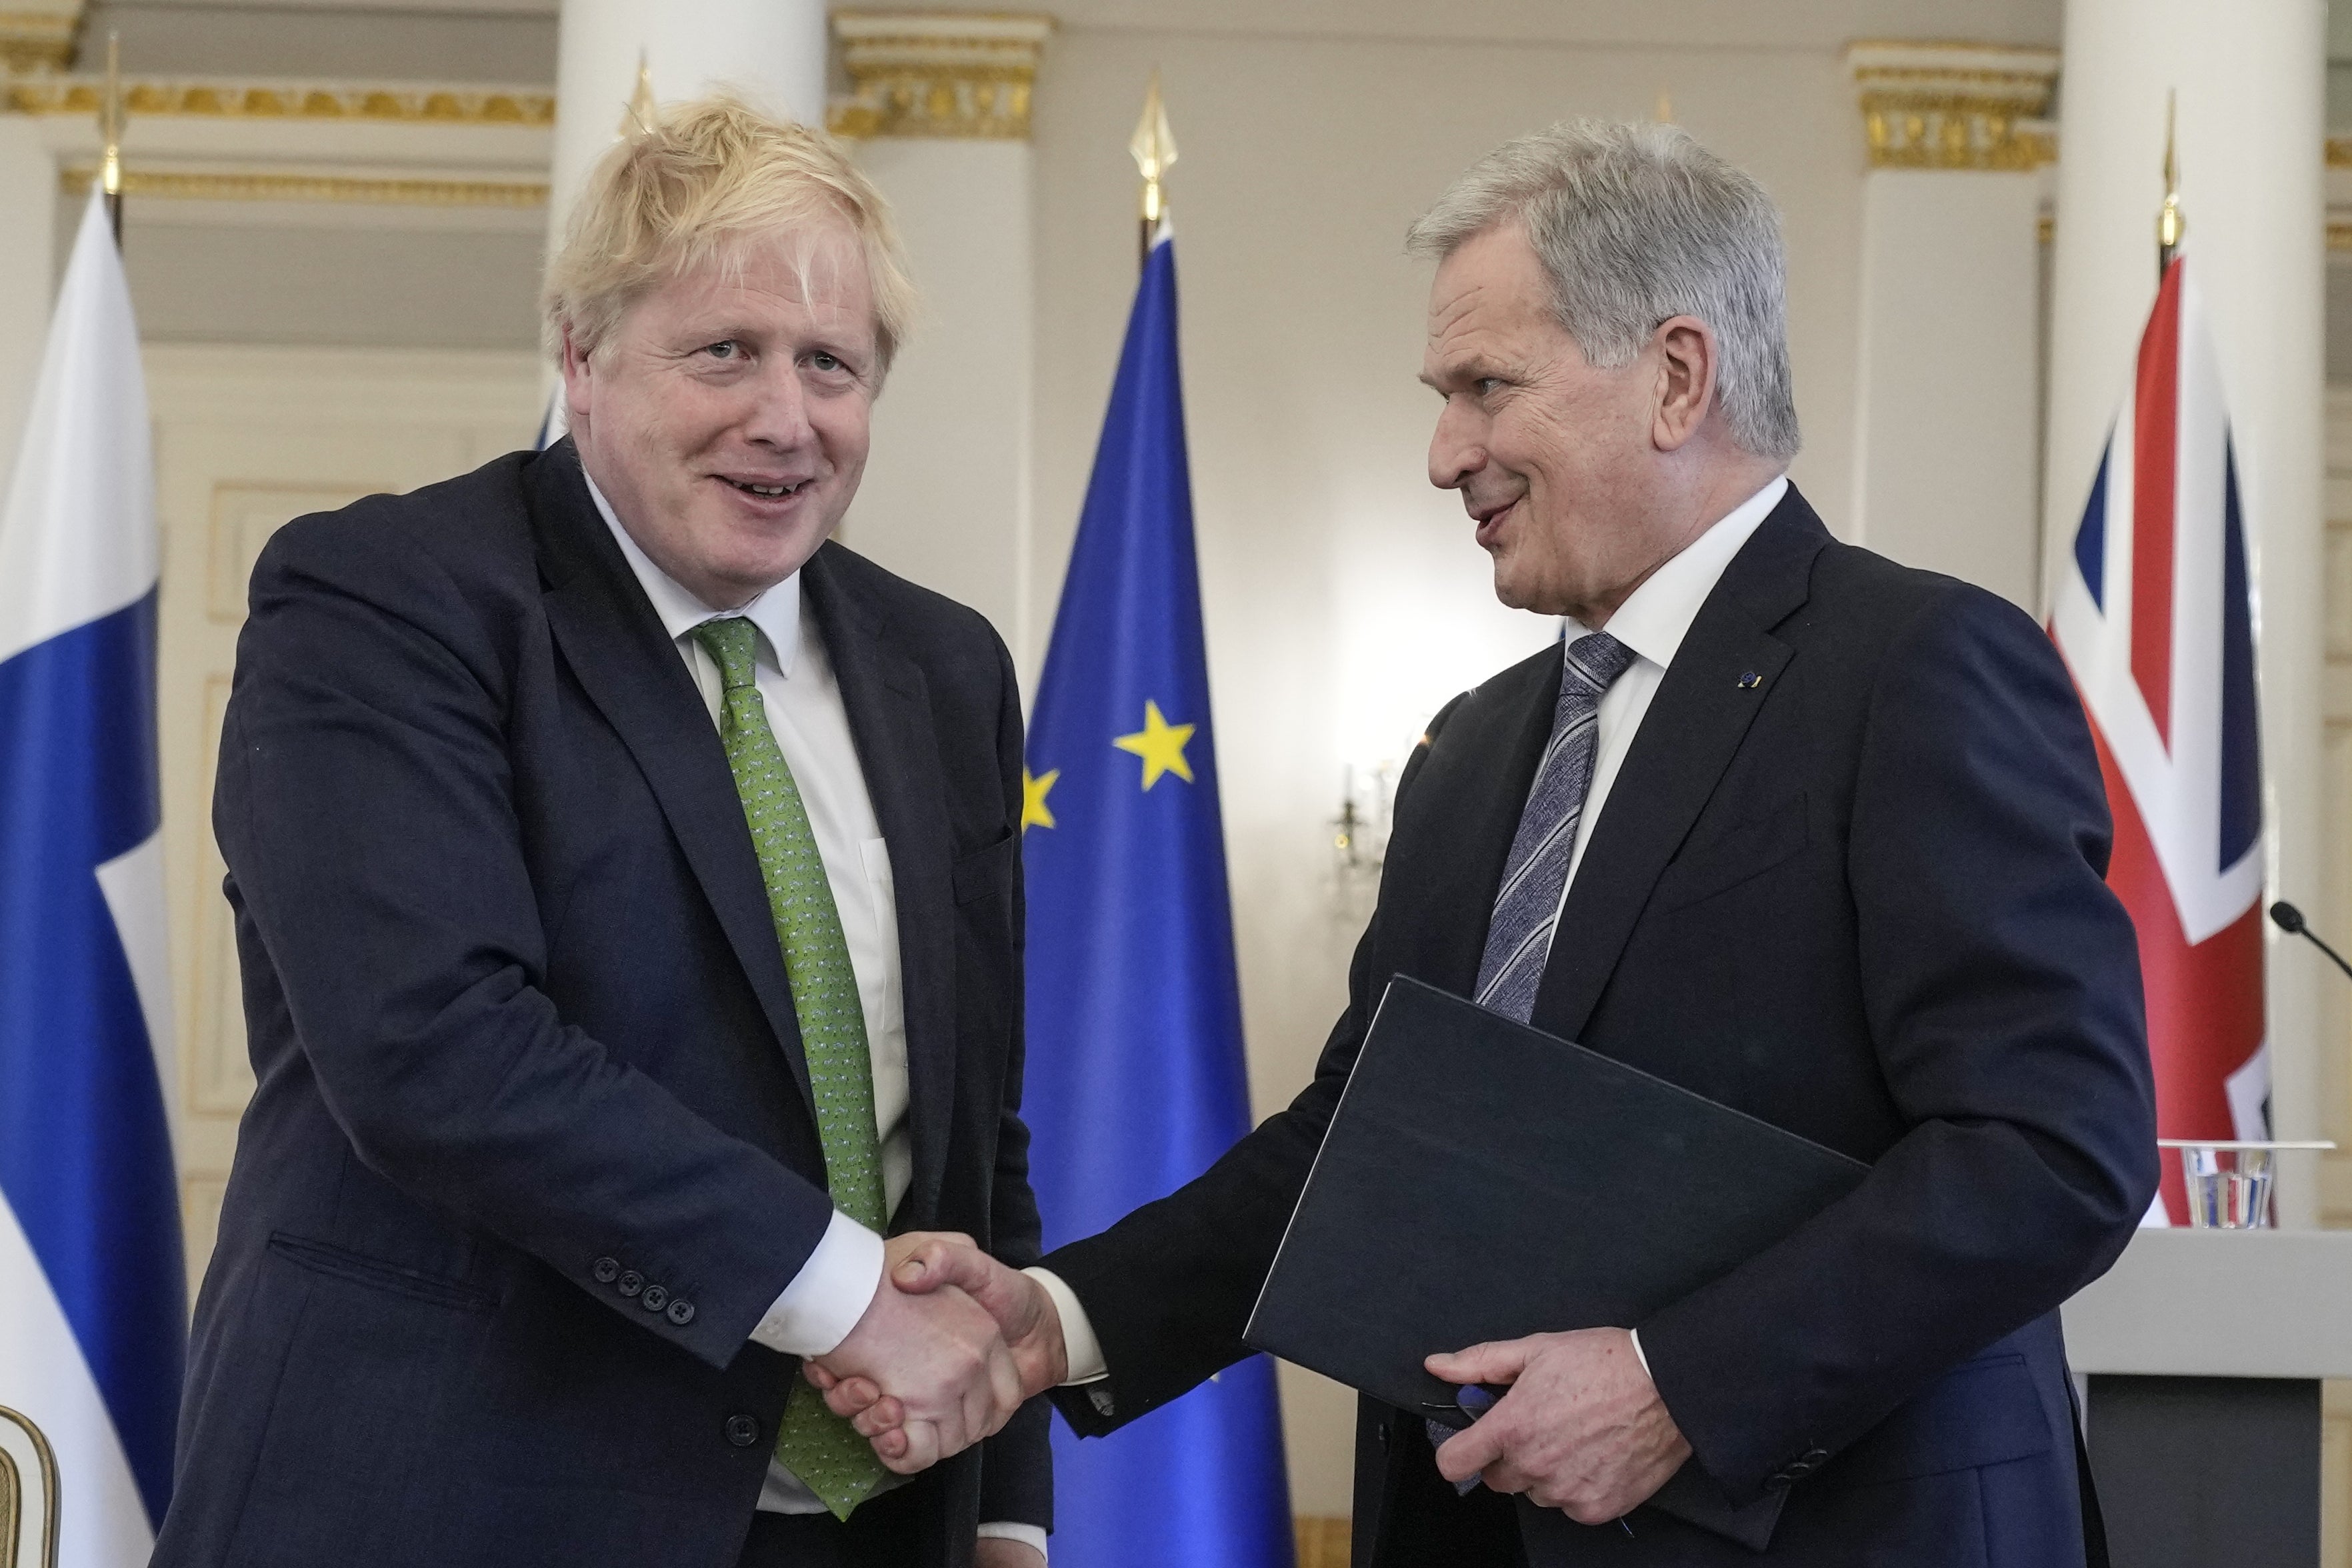 Prime Minister Boris Johnson (left) and Finland’s President Sauli Niinisto, shake hands after signing a security assurance (Frank Augstein/PA)